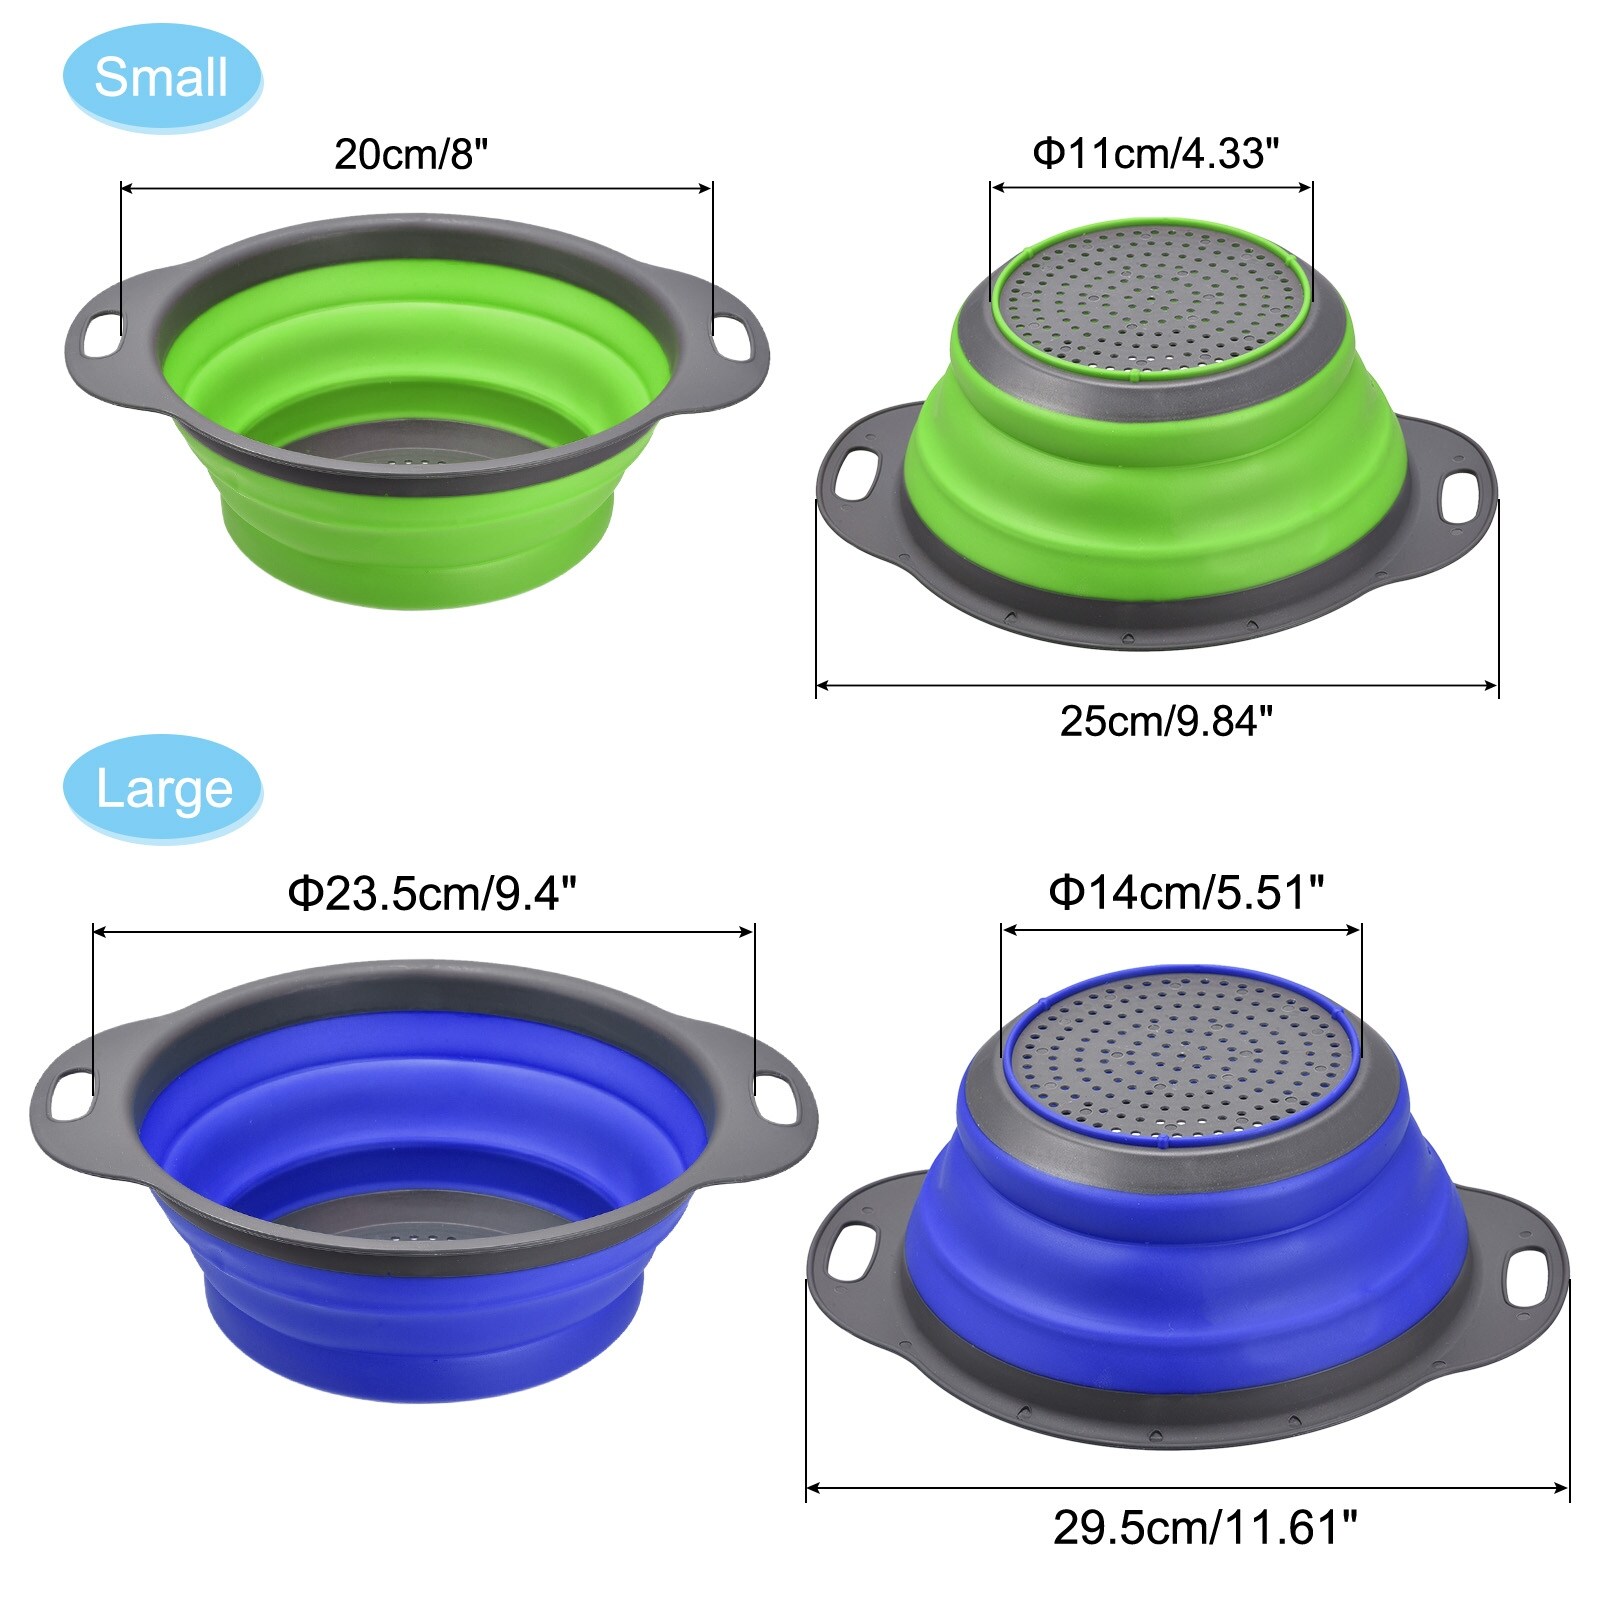 Collapsible Colander 4 Pcs Silicone Foldable Strainer 8in & 9.4in - green blue - 2 Size(8 & 9.4 inch)